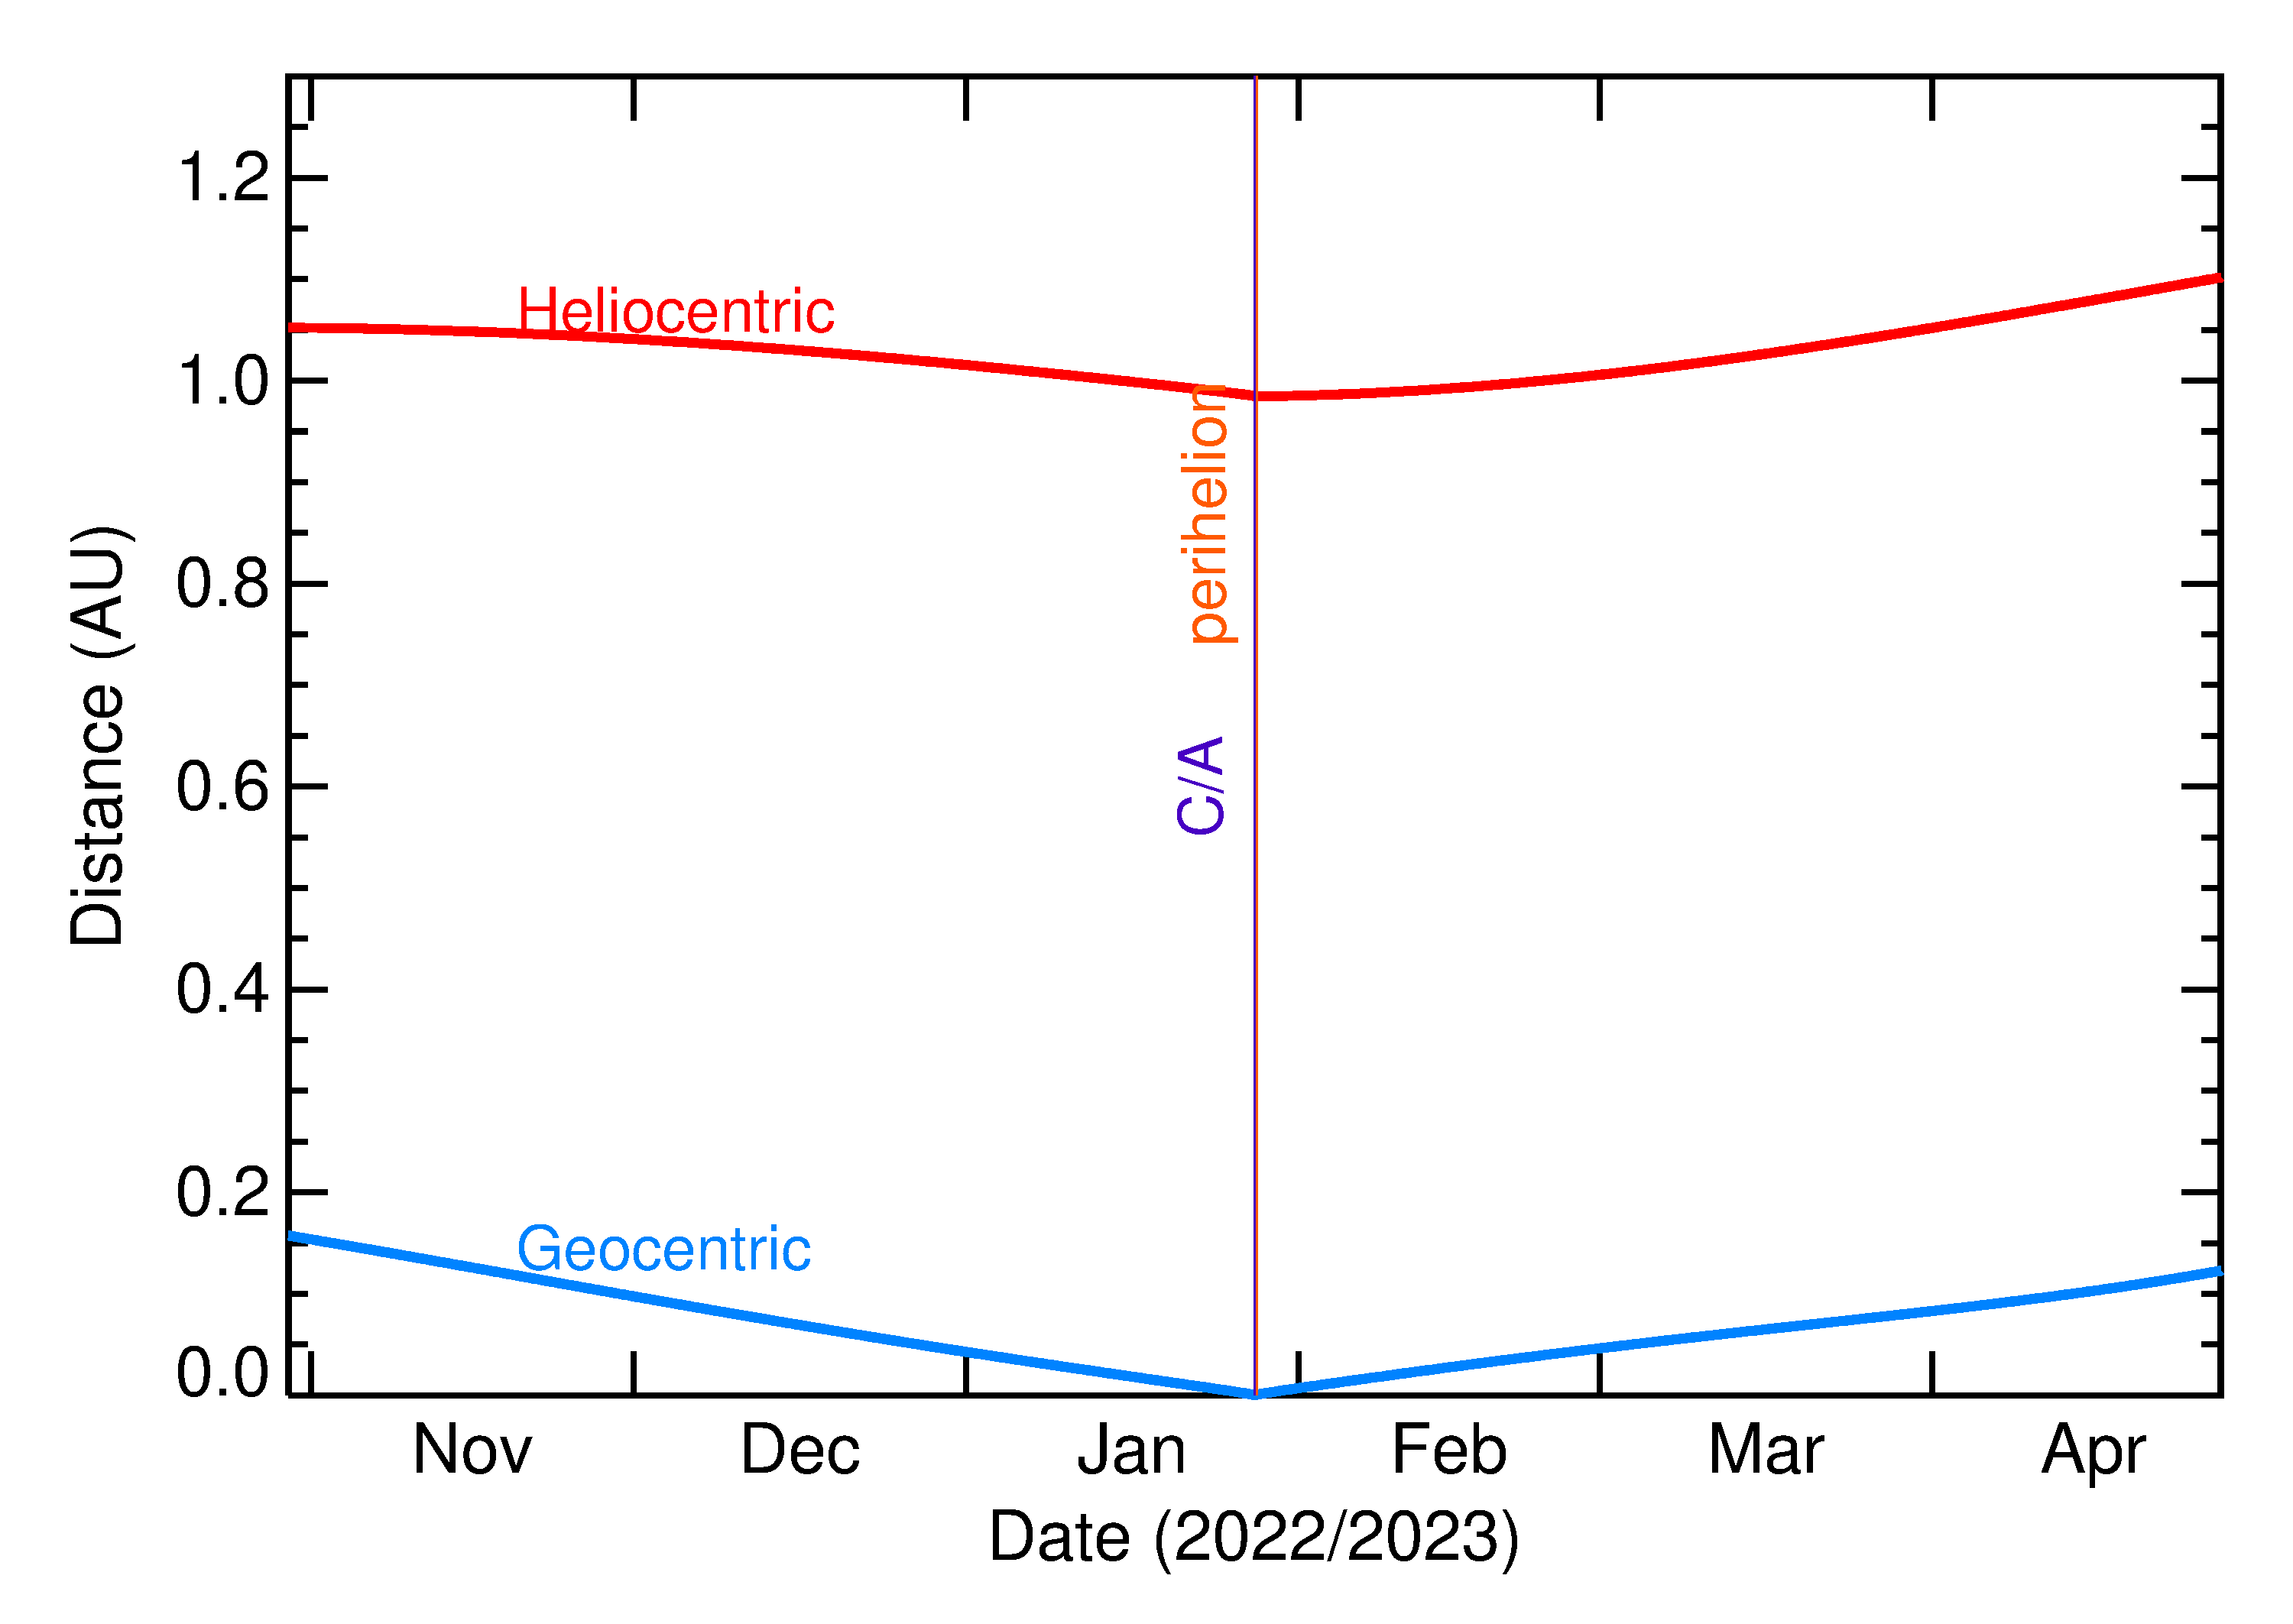 Heliocentric and Geocentric Distances of 2023 BU in the months around closest approach